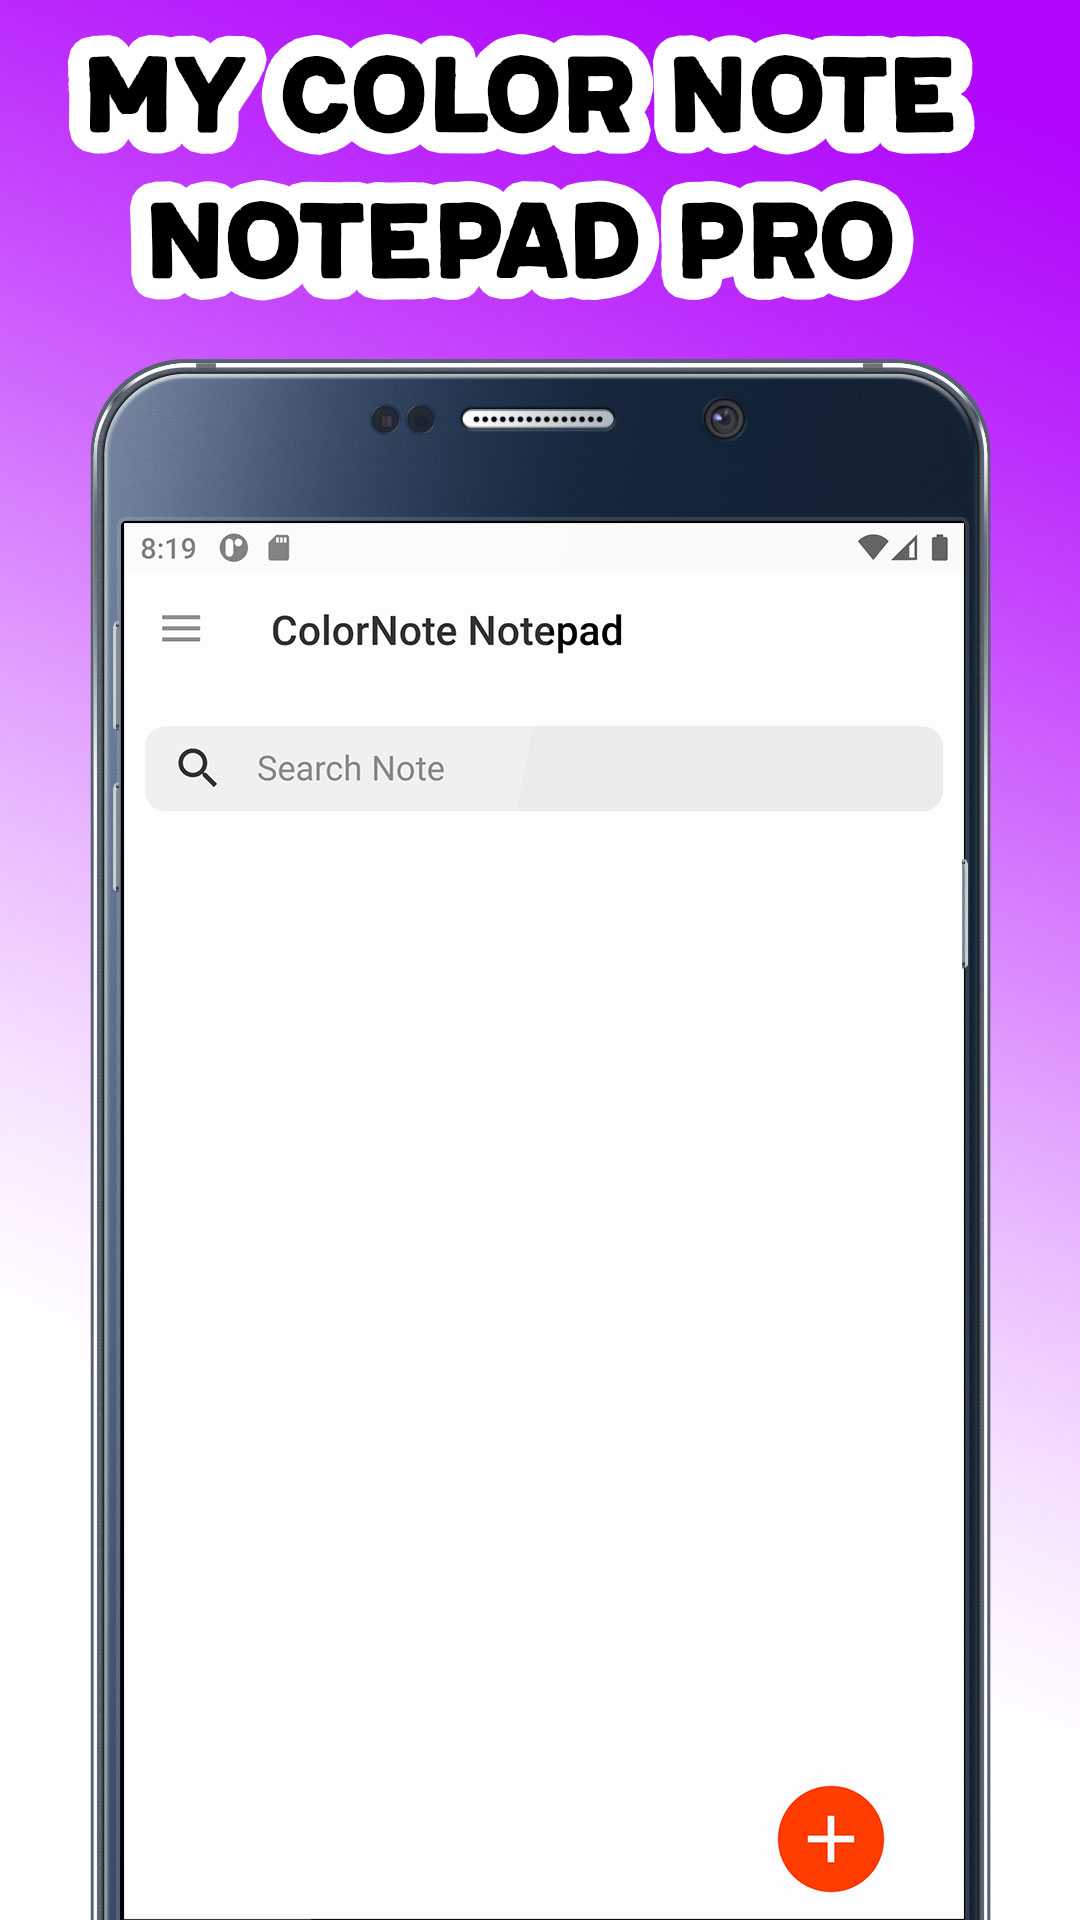 My Color Note Notepad Pro - ColorNote notebook & memo creating and editing text notes Notepad notes - NO ADS